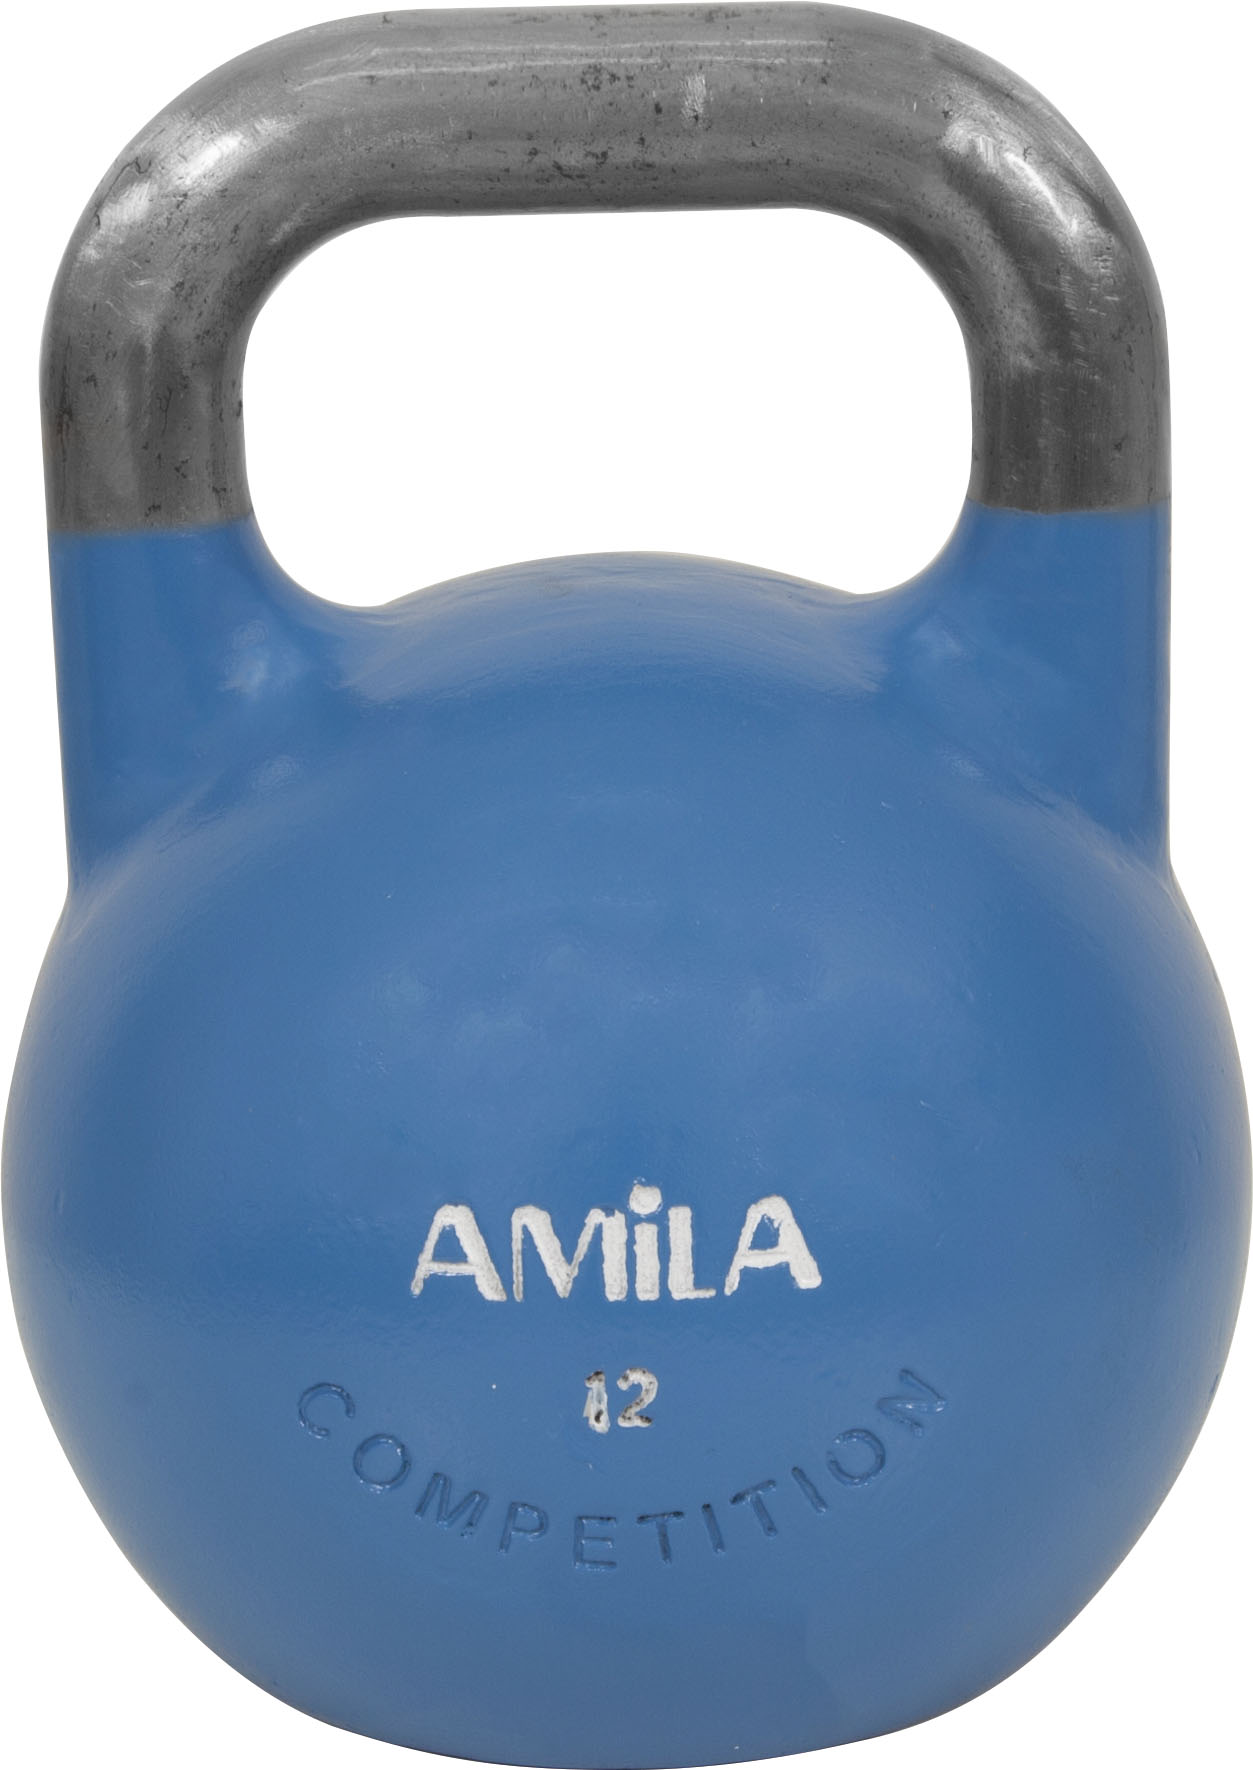 AMILA Kettlebell Competition Series...